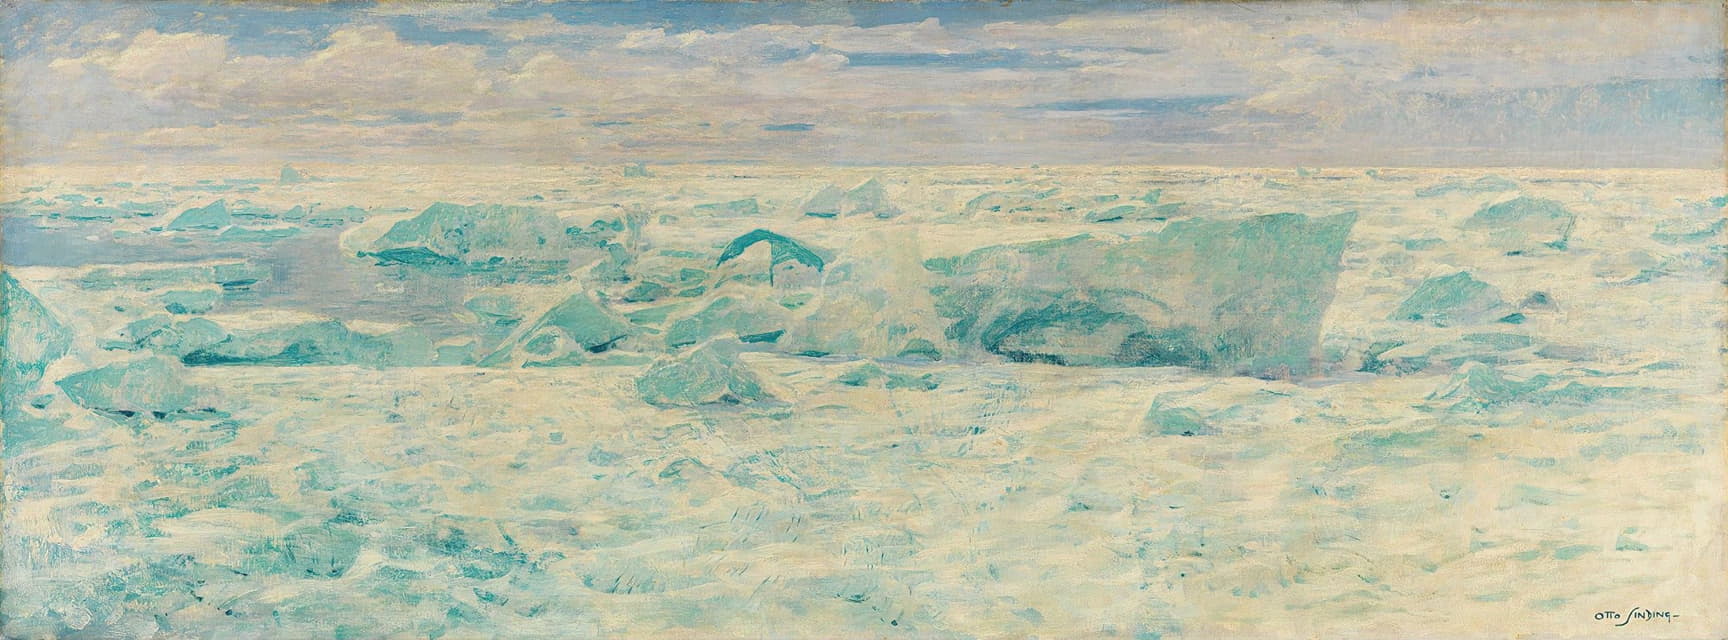 Otto Sinding - Ice Floes in the Arctic Ocean